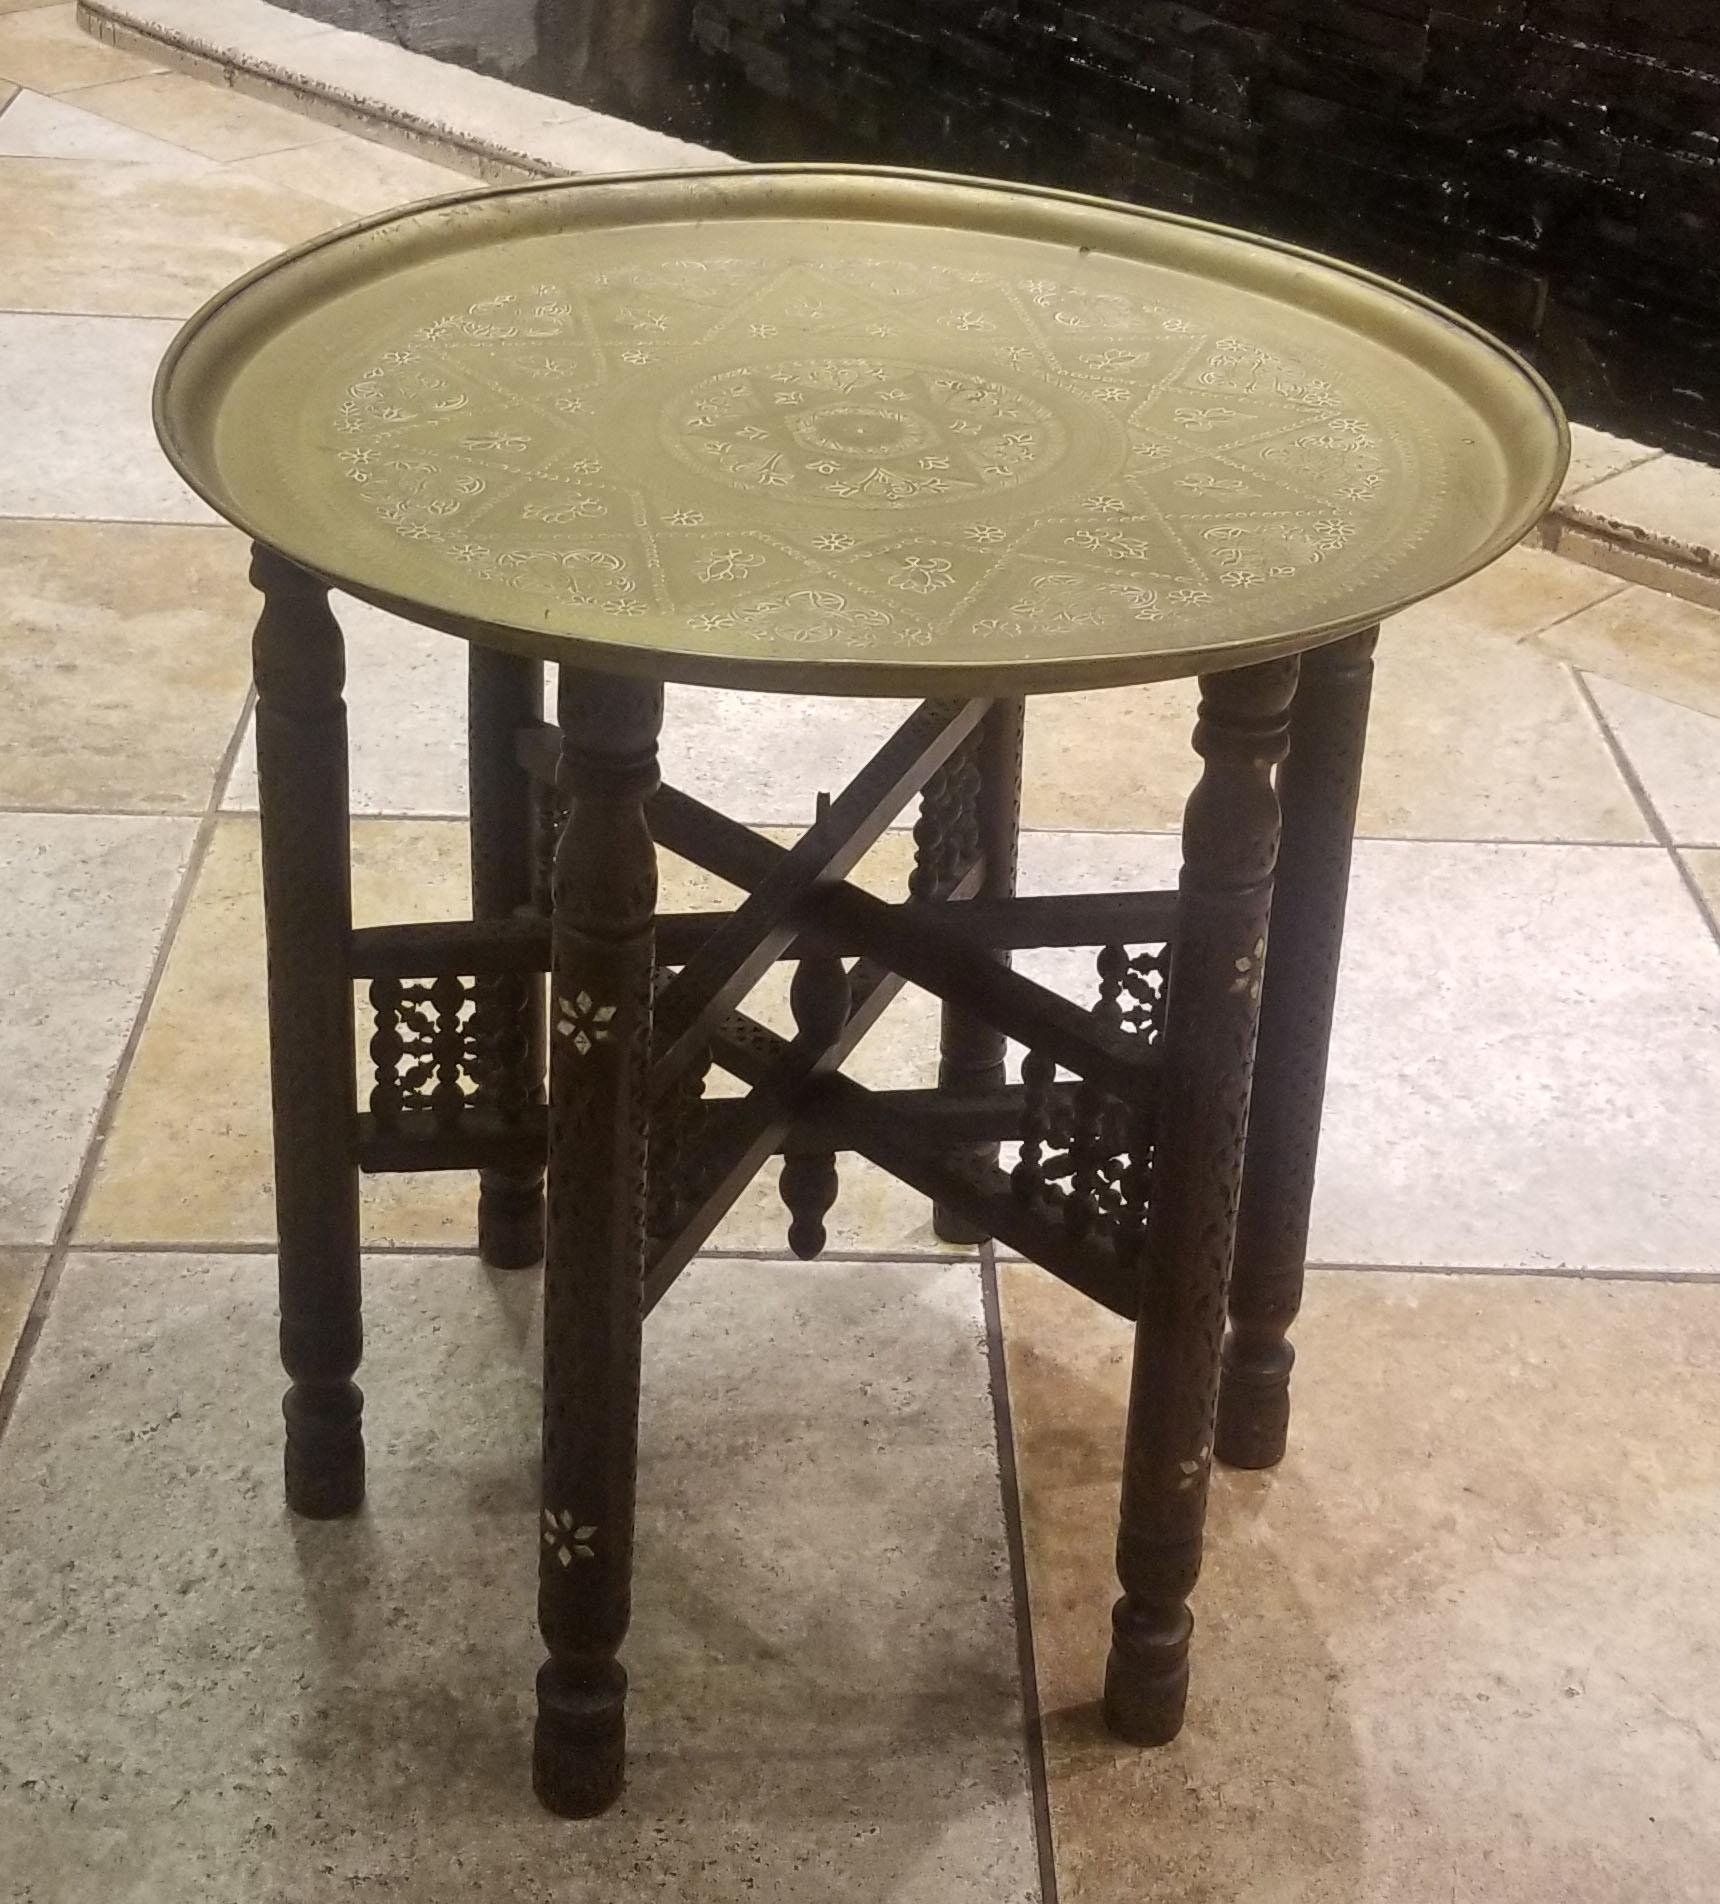 One of a kind Moroccan copper tray table, ideal as a coffee table or a side table. Very exotic. Round shape and an amazing look. Description
Influenced by Moorish decor, its detailed copper hammering on top, this table will sure be an excellent